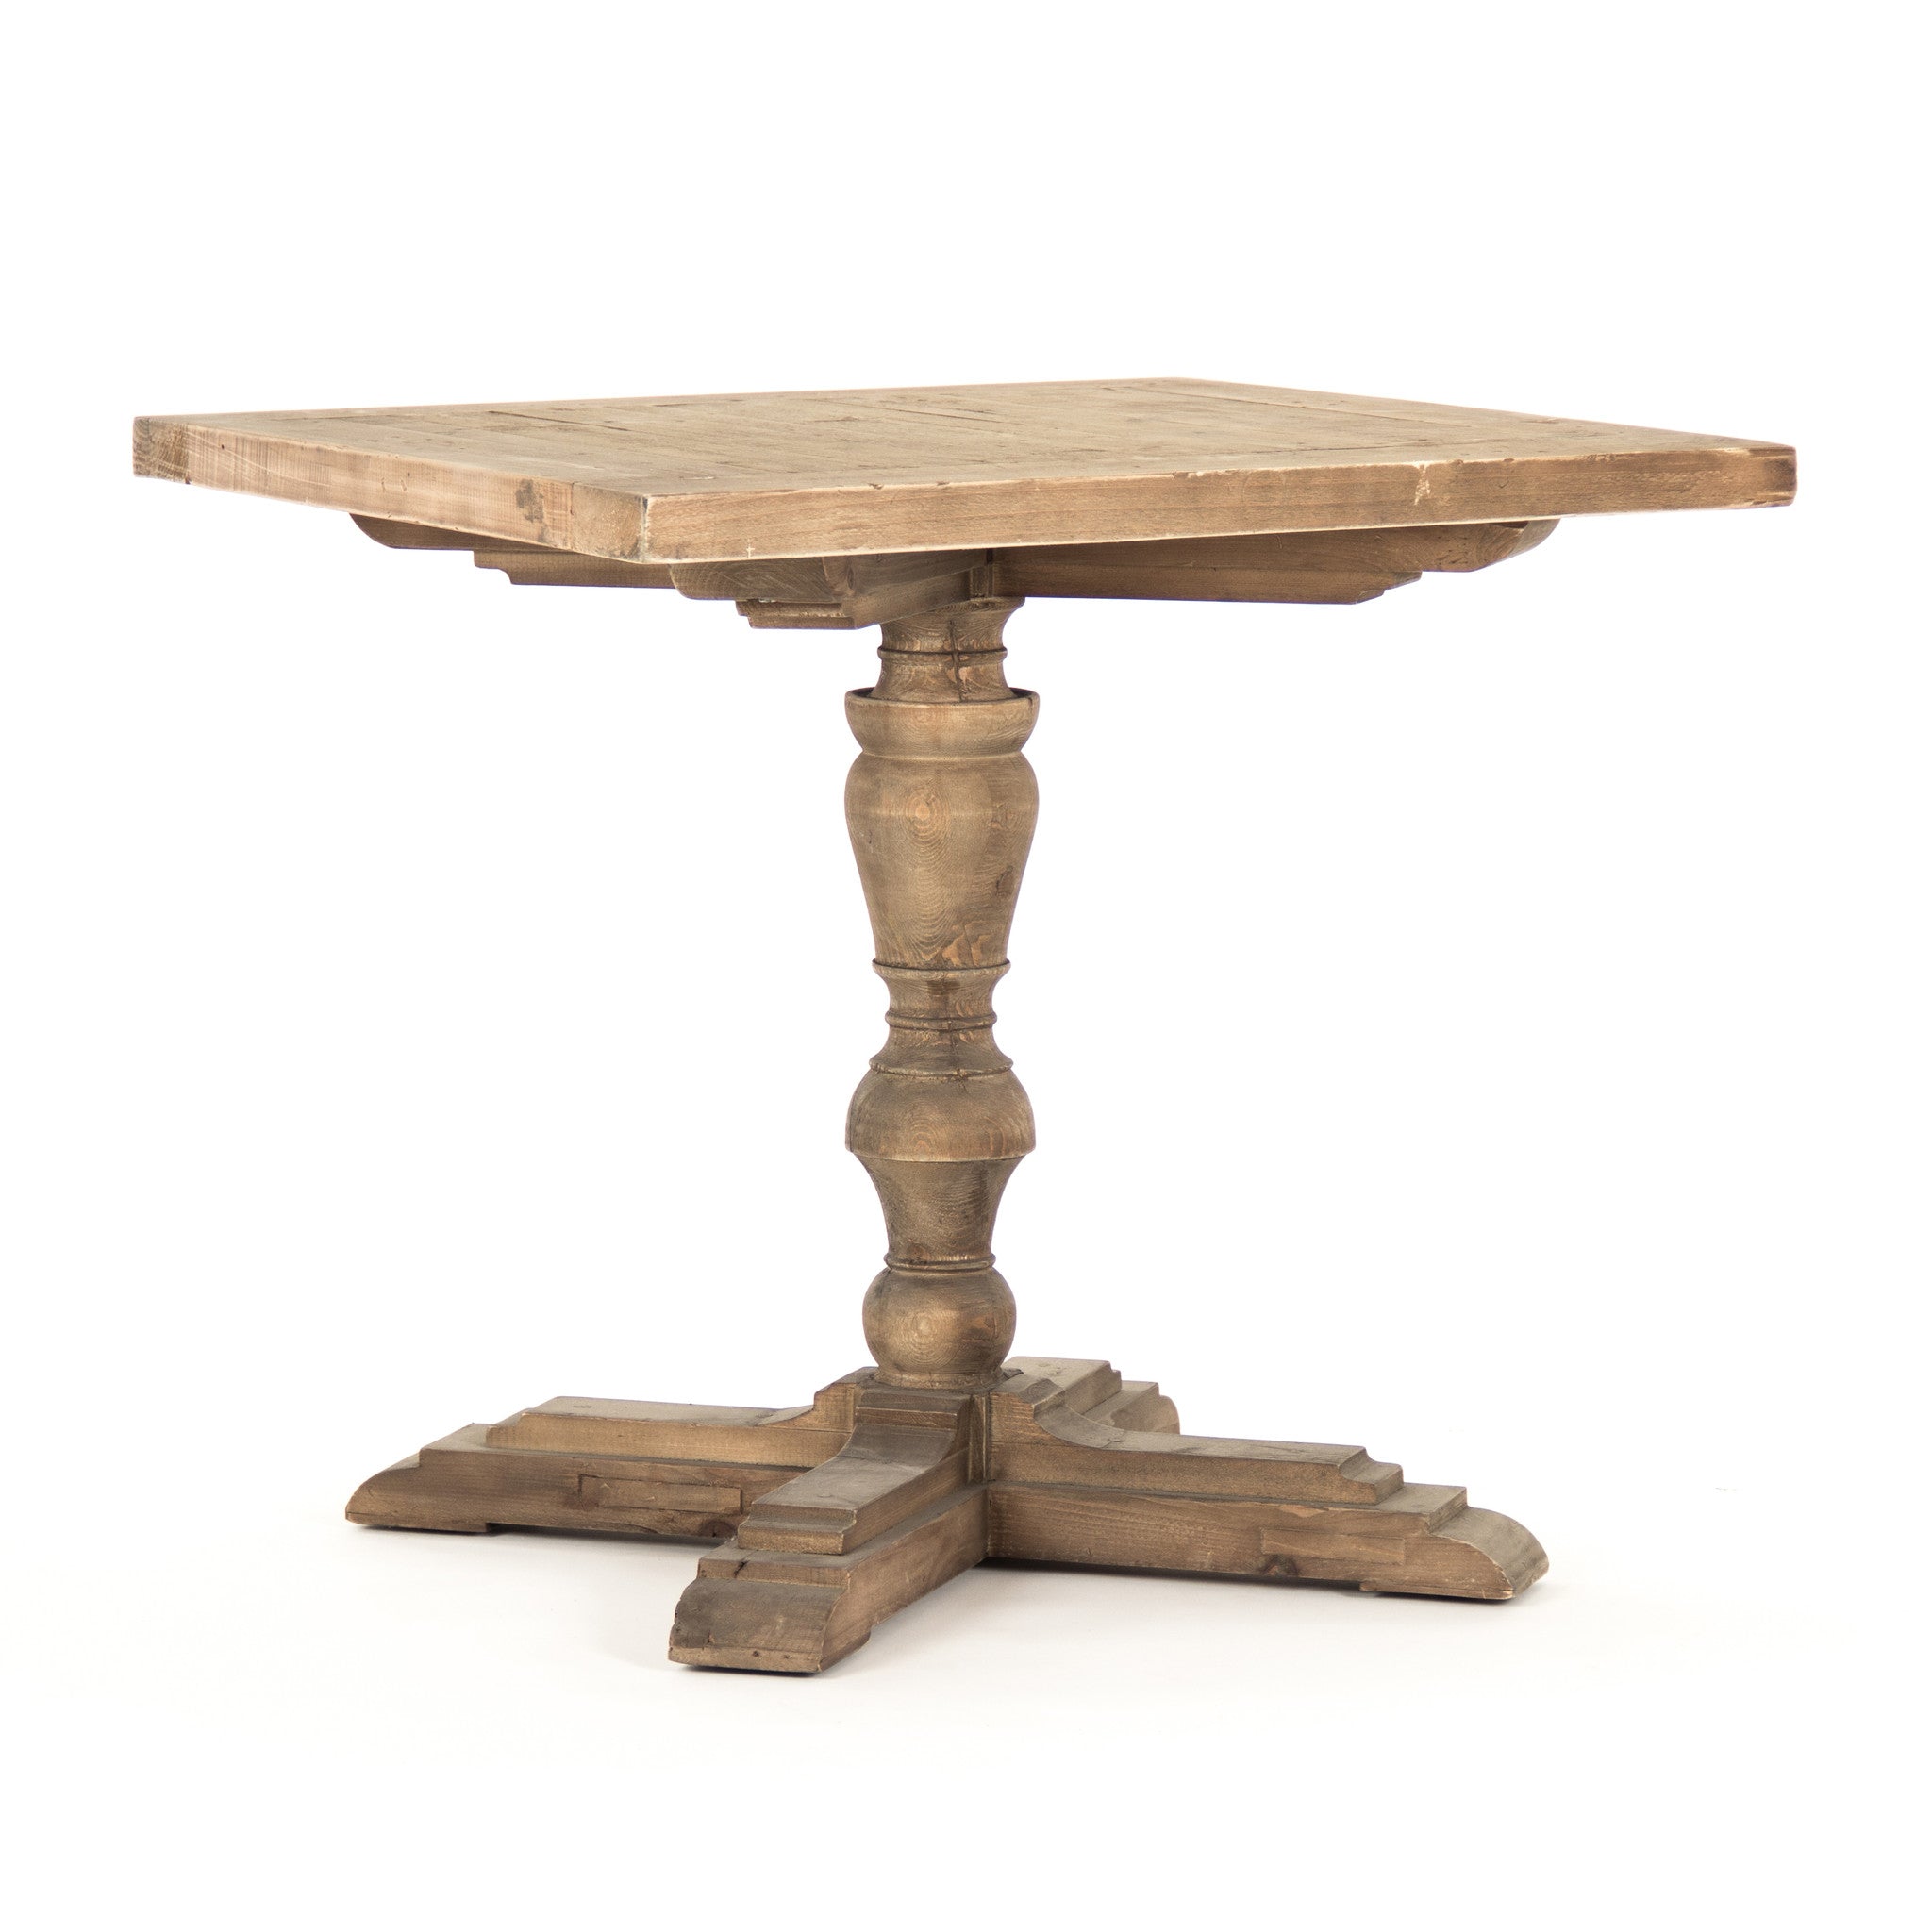 Accent Table - Timeo Square Table